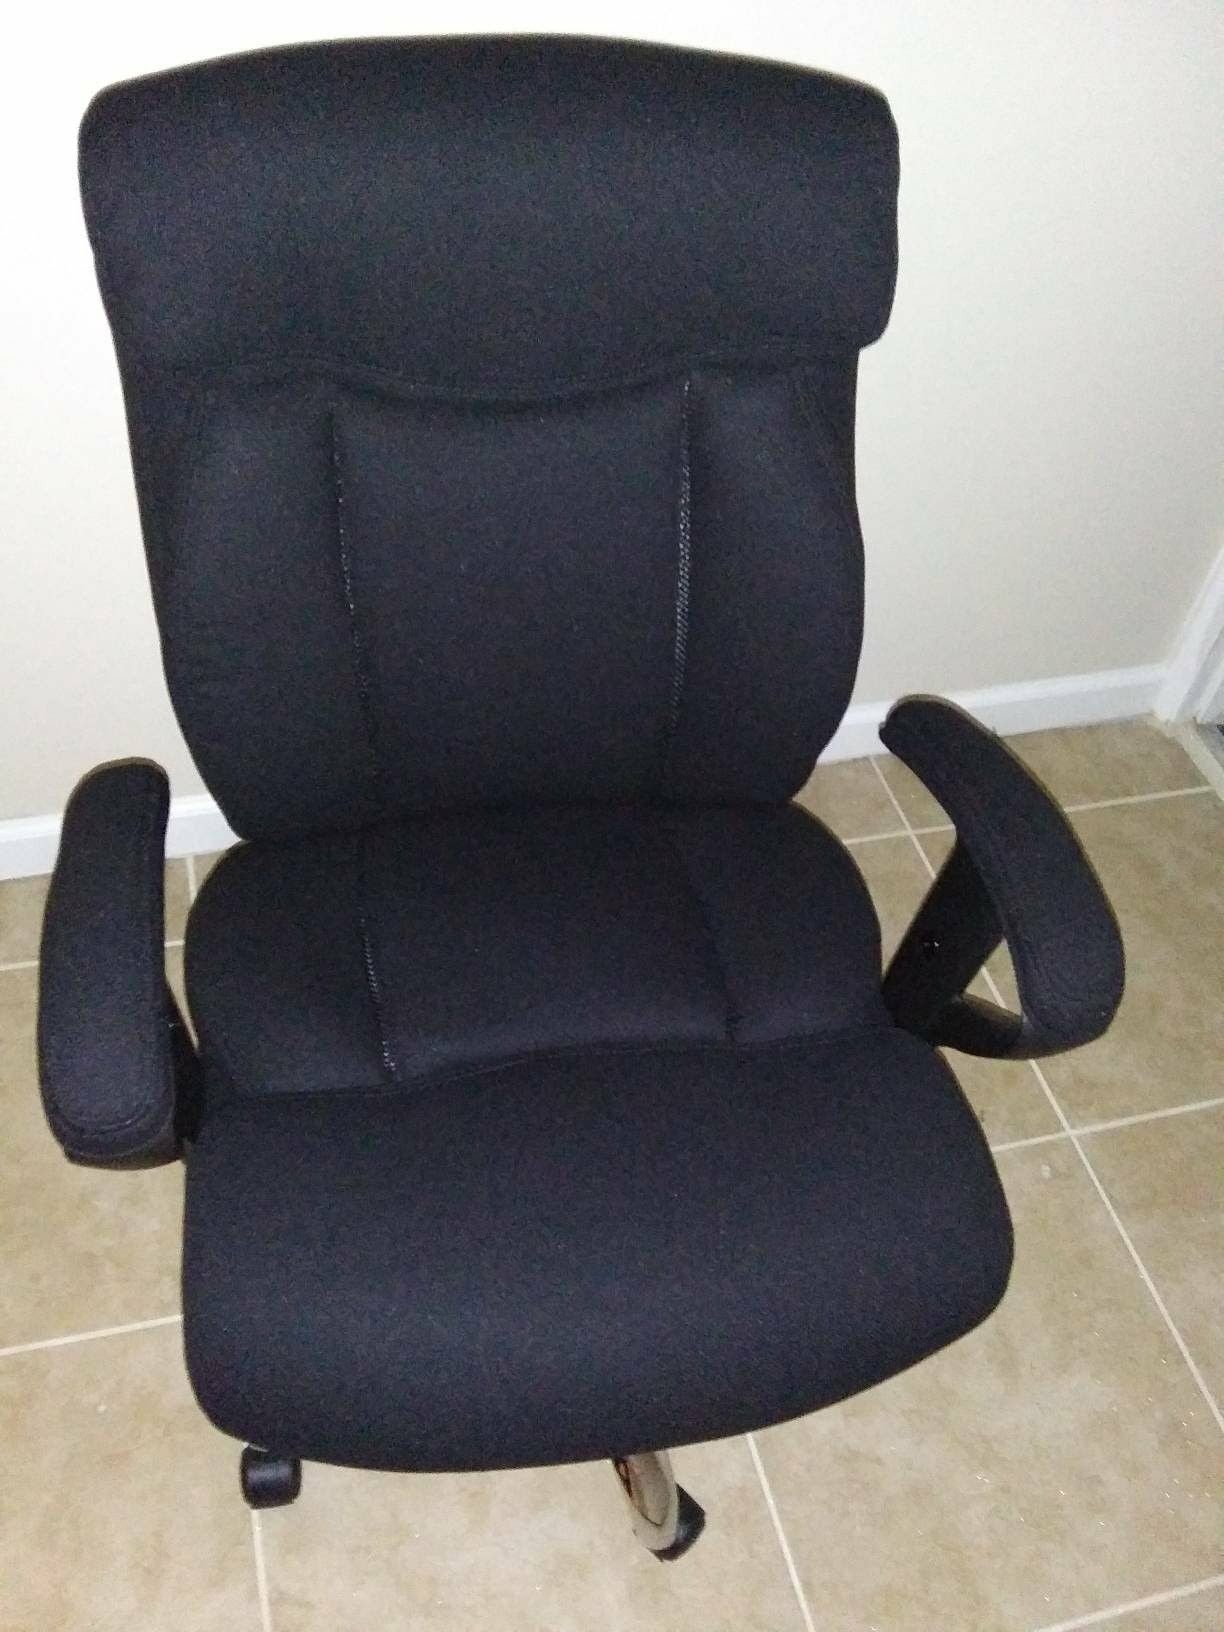 Serta Manager's Chair 48331